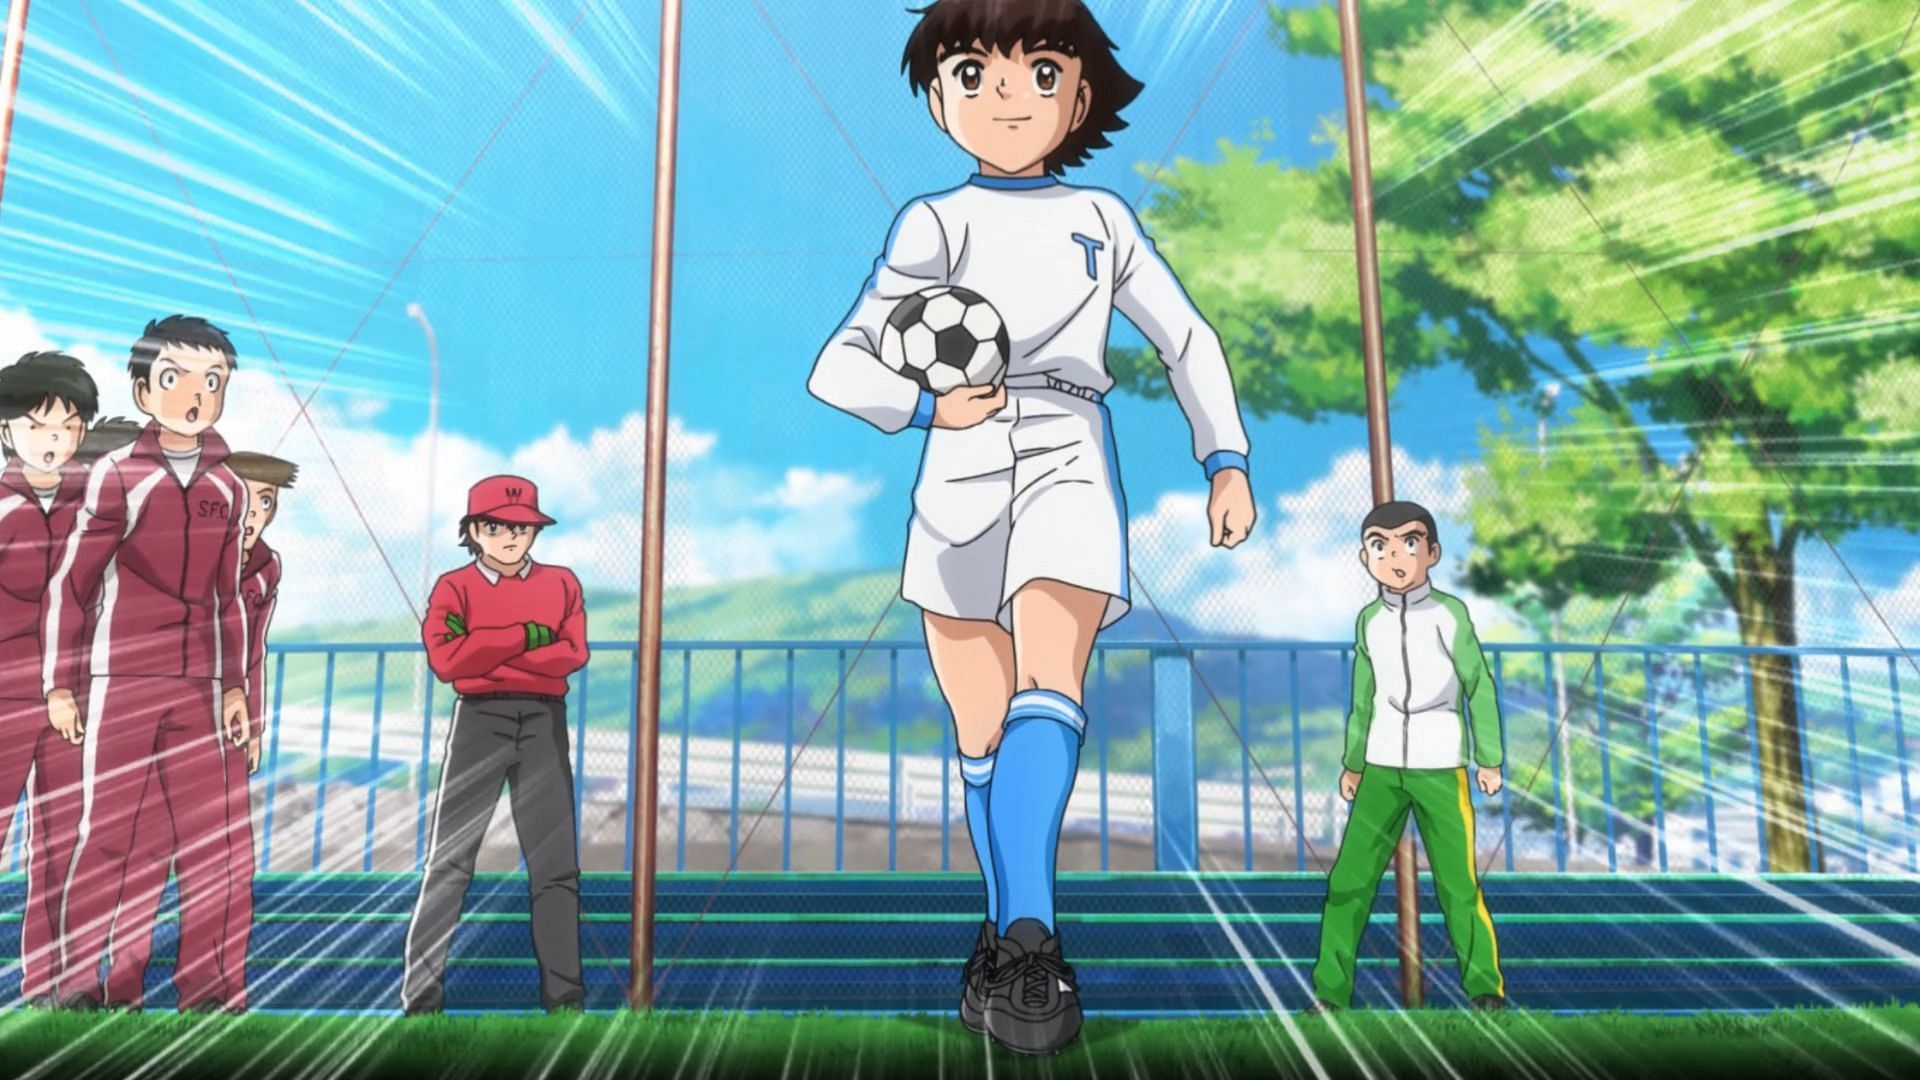 So, two of my favorite anime series are getting a game within a month (Fairy  Tail, Captain Tsubasa), where is the hype?